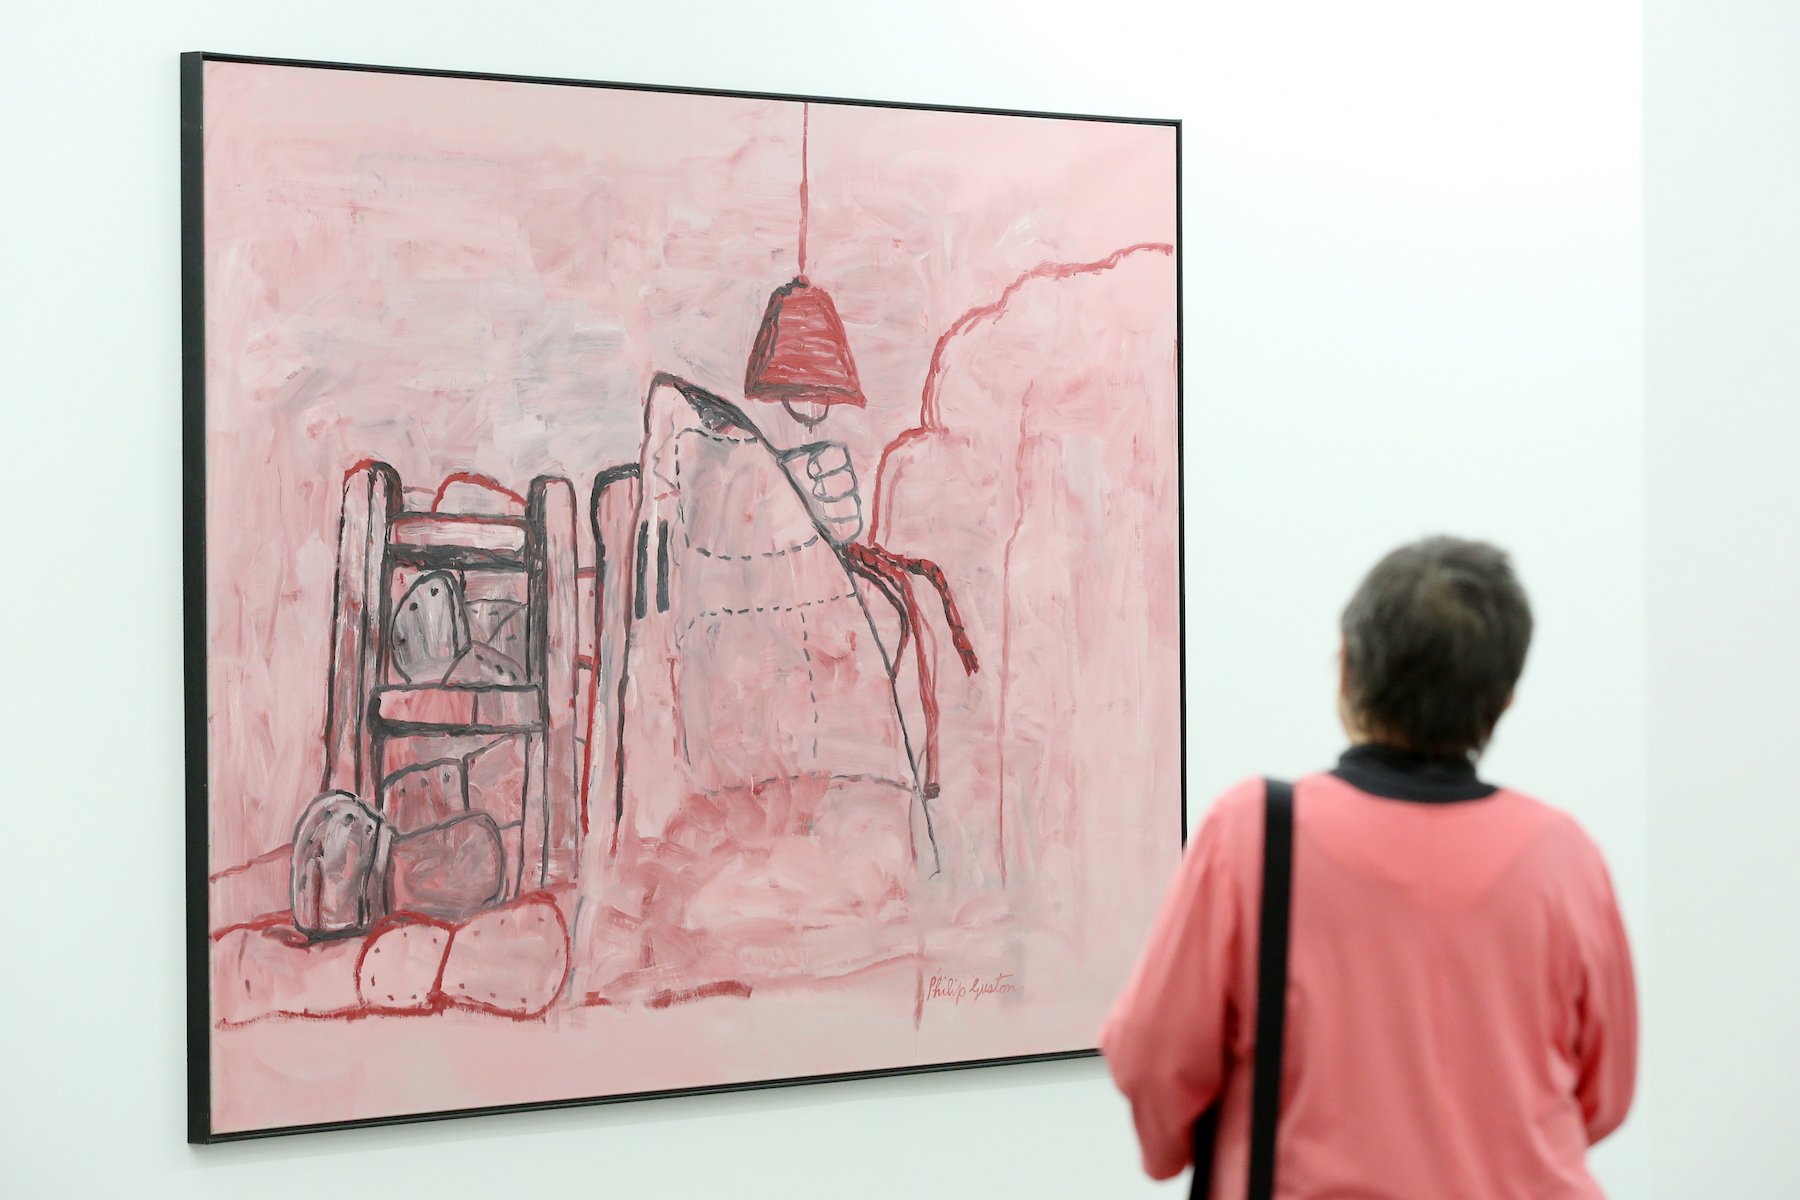 A visitor looks at the work <em>Cave</em> by U.S. painter Philip Guston. Photo by Bodo Marks/picture alliance via Getty Images.